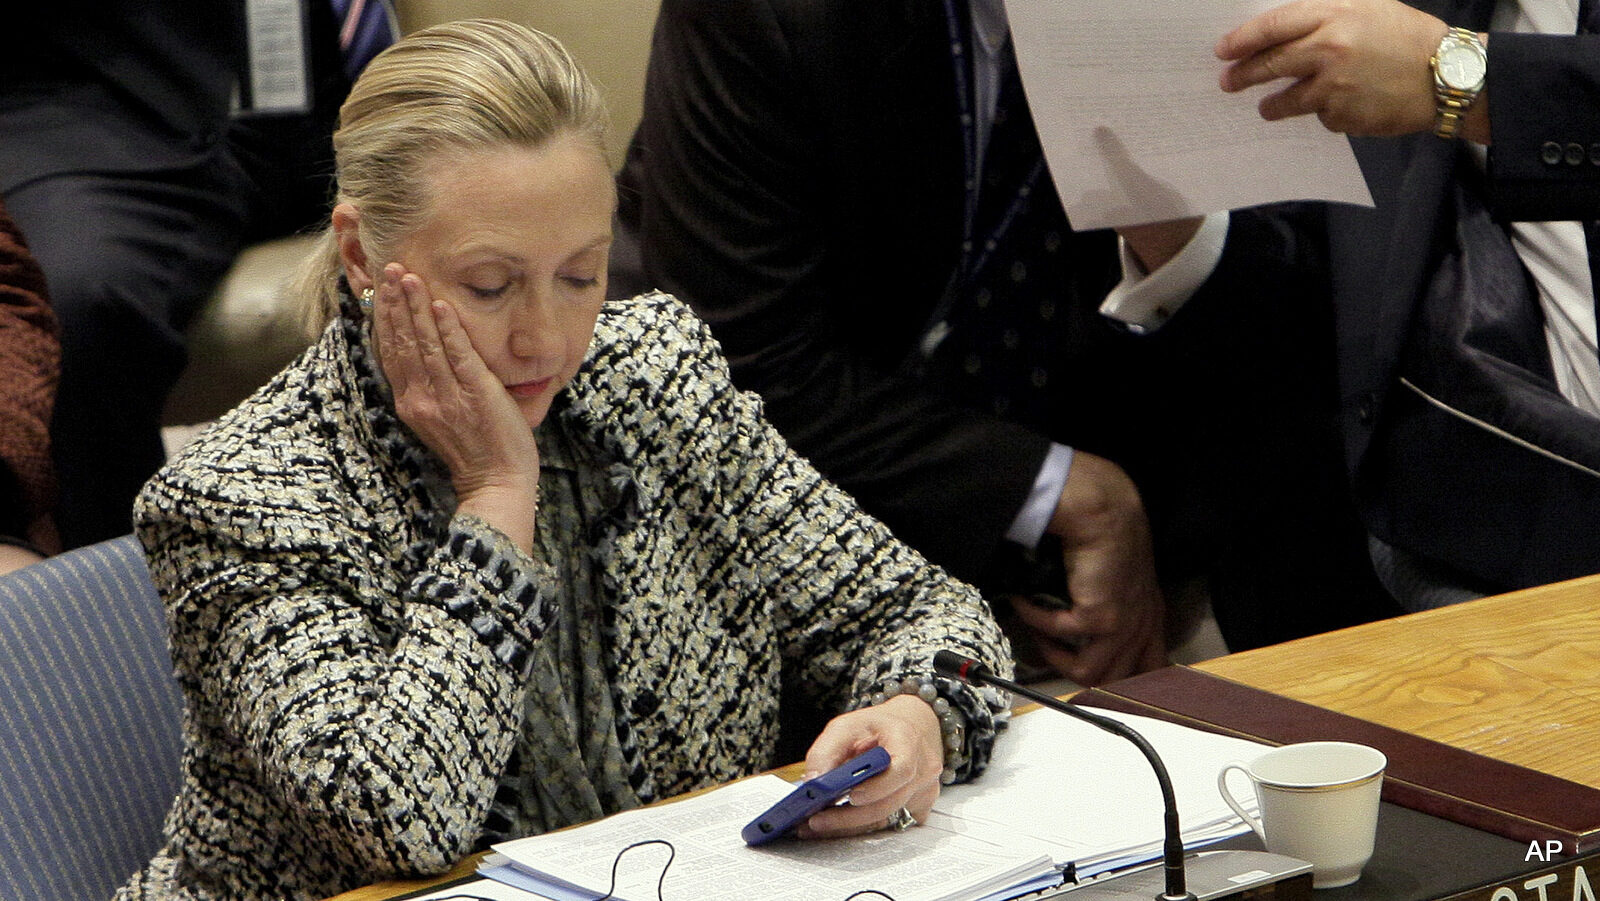 Secretary of State Hillary Clinton checks her mobile phone after her address to the Security Council at United Nations headquarters, March 12, 2012.